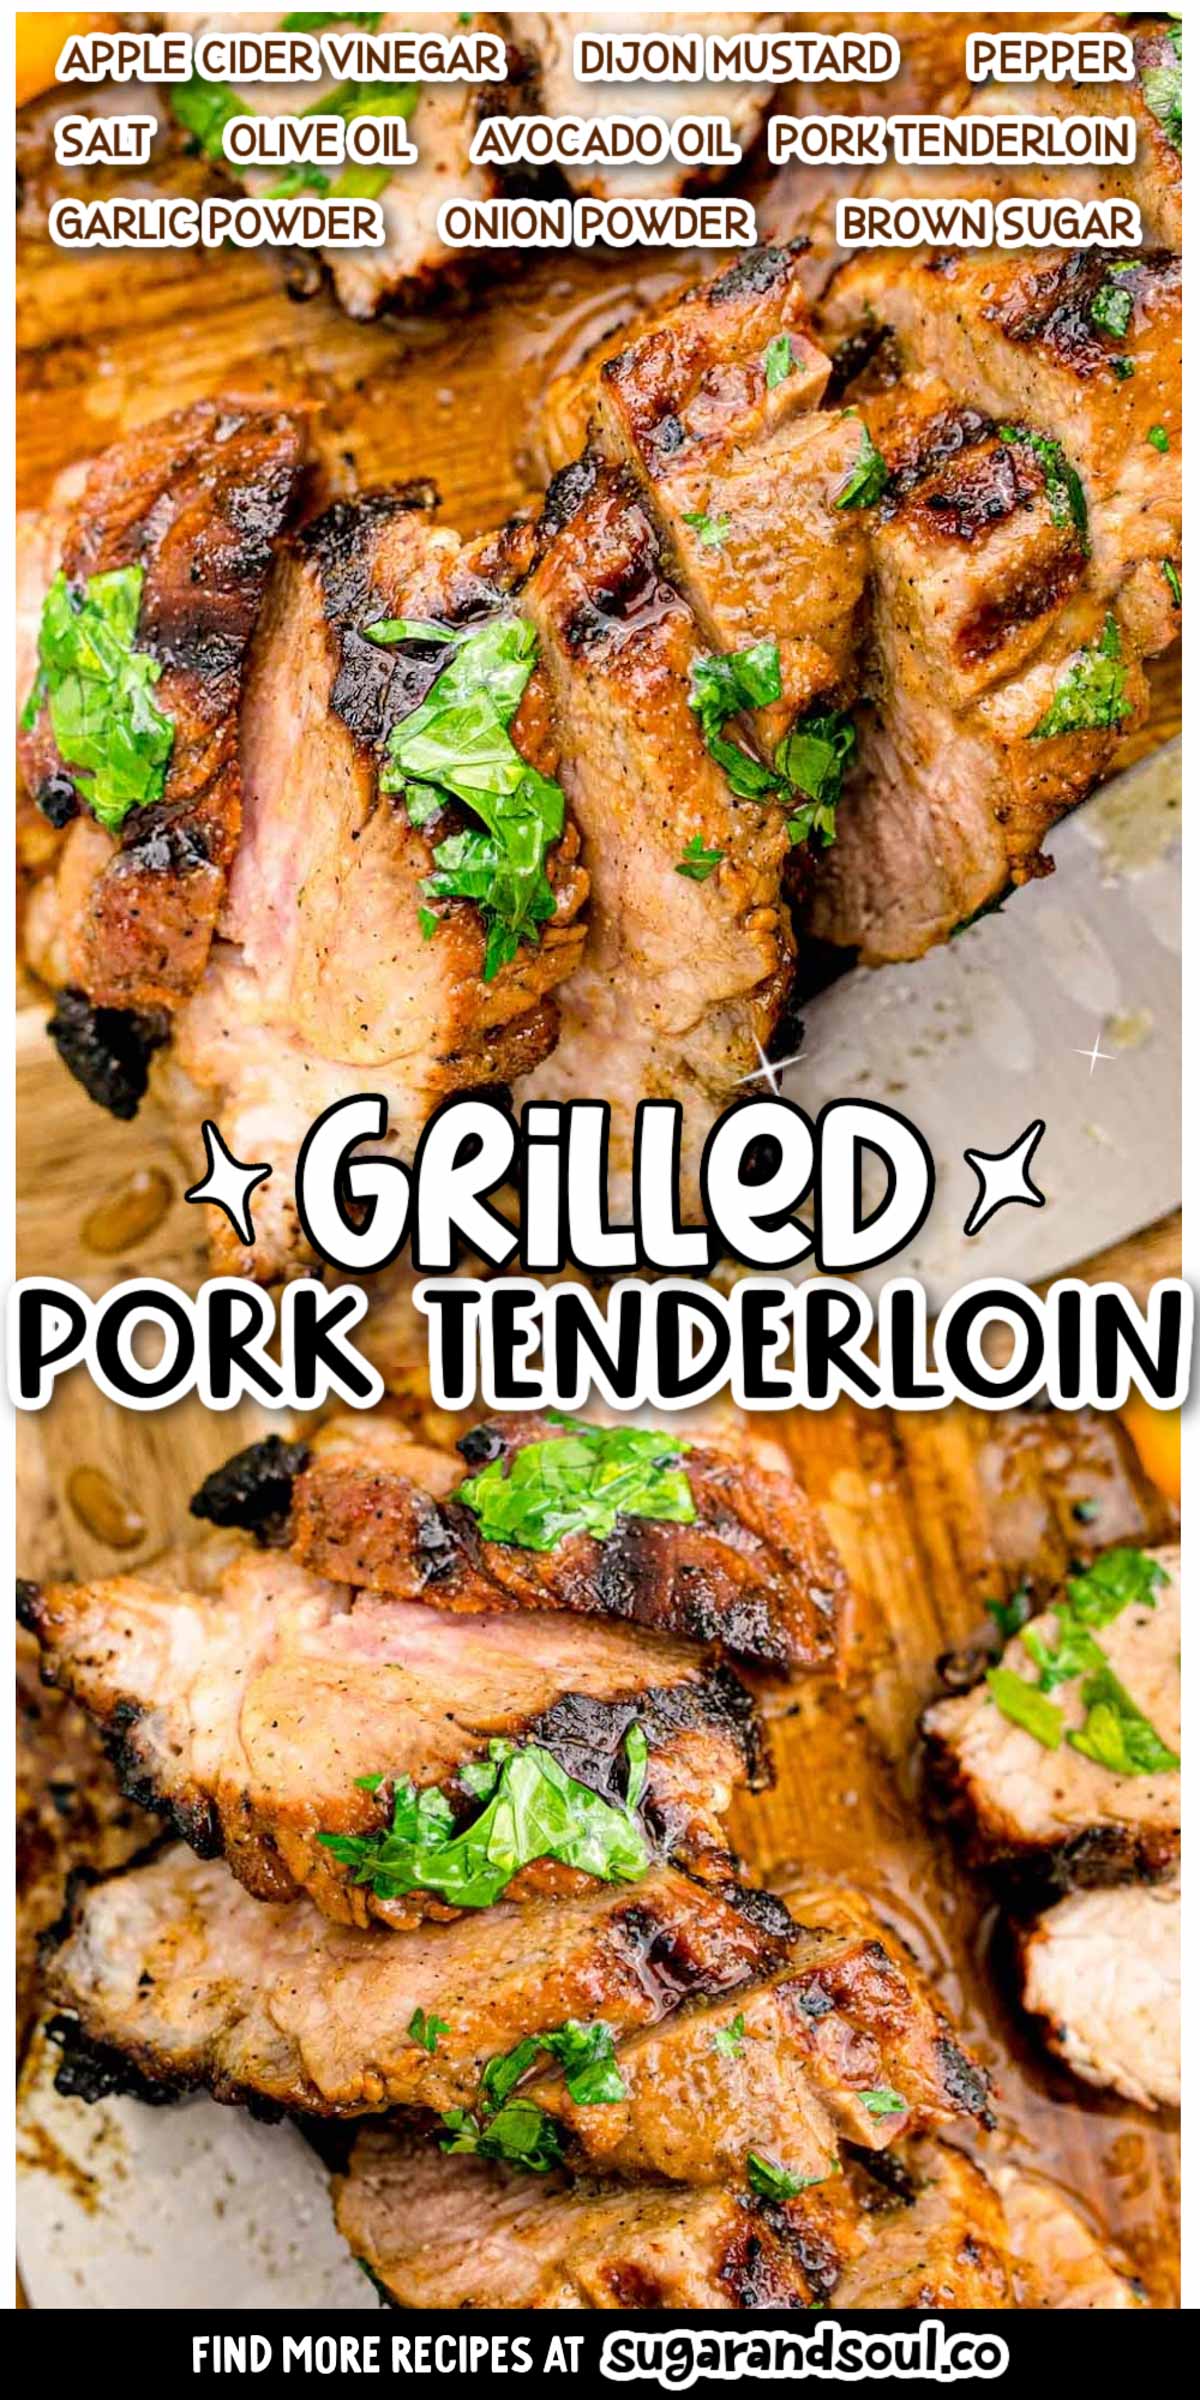 Grilled Pork tenderloin is tender, juicy meat that's been marinated in a homemade vinaigrette that's made with pantry staple ingredients! Takes just 15 minutes of hands-on prep time! via @sugarandsoulco